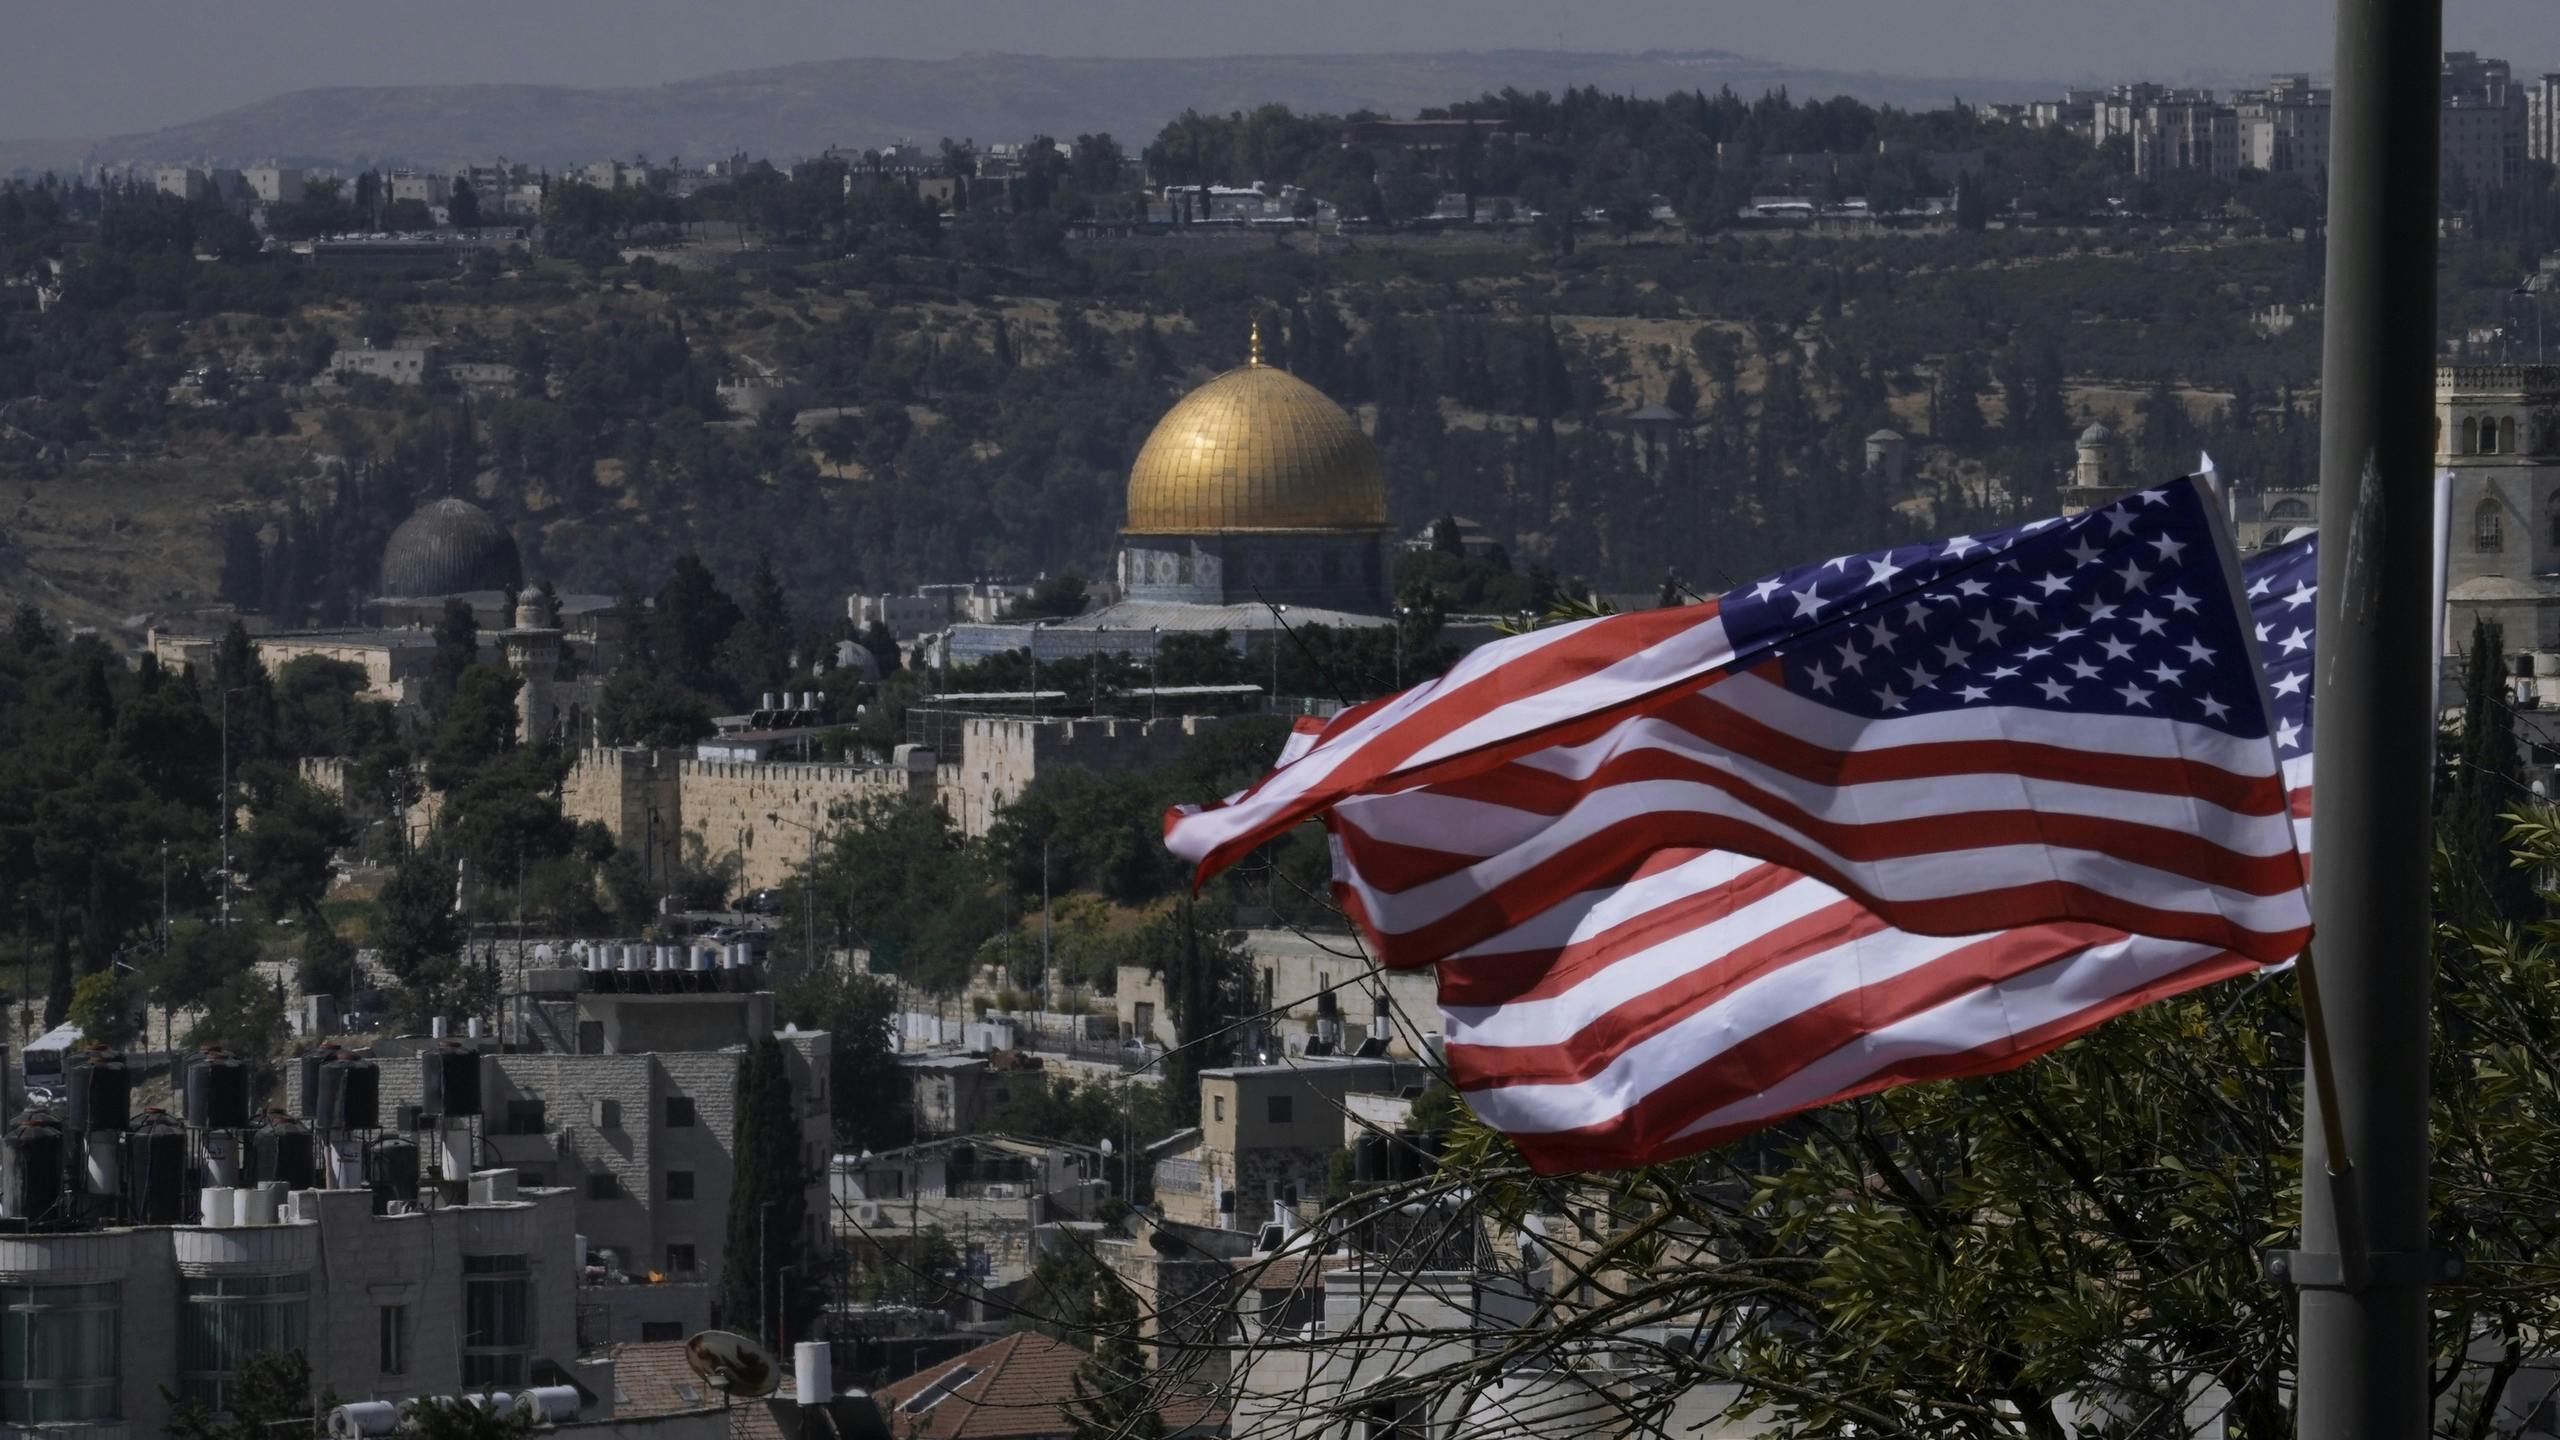 The American flag is flying in Jerusalem.